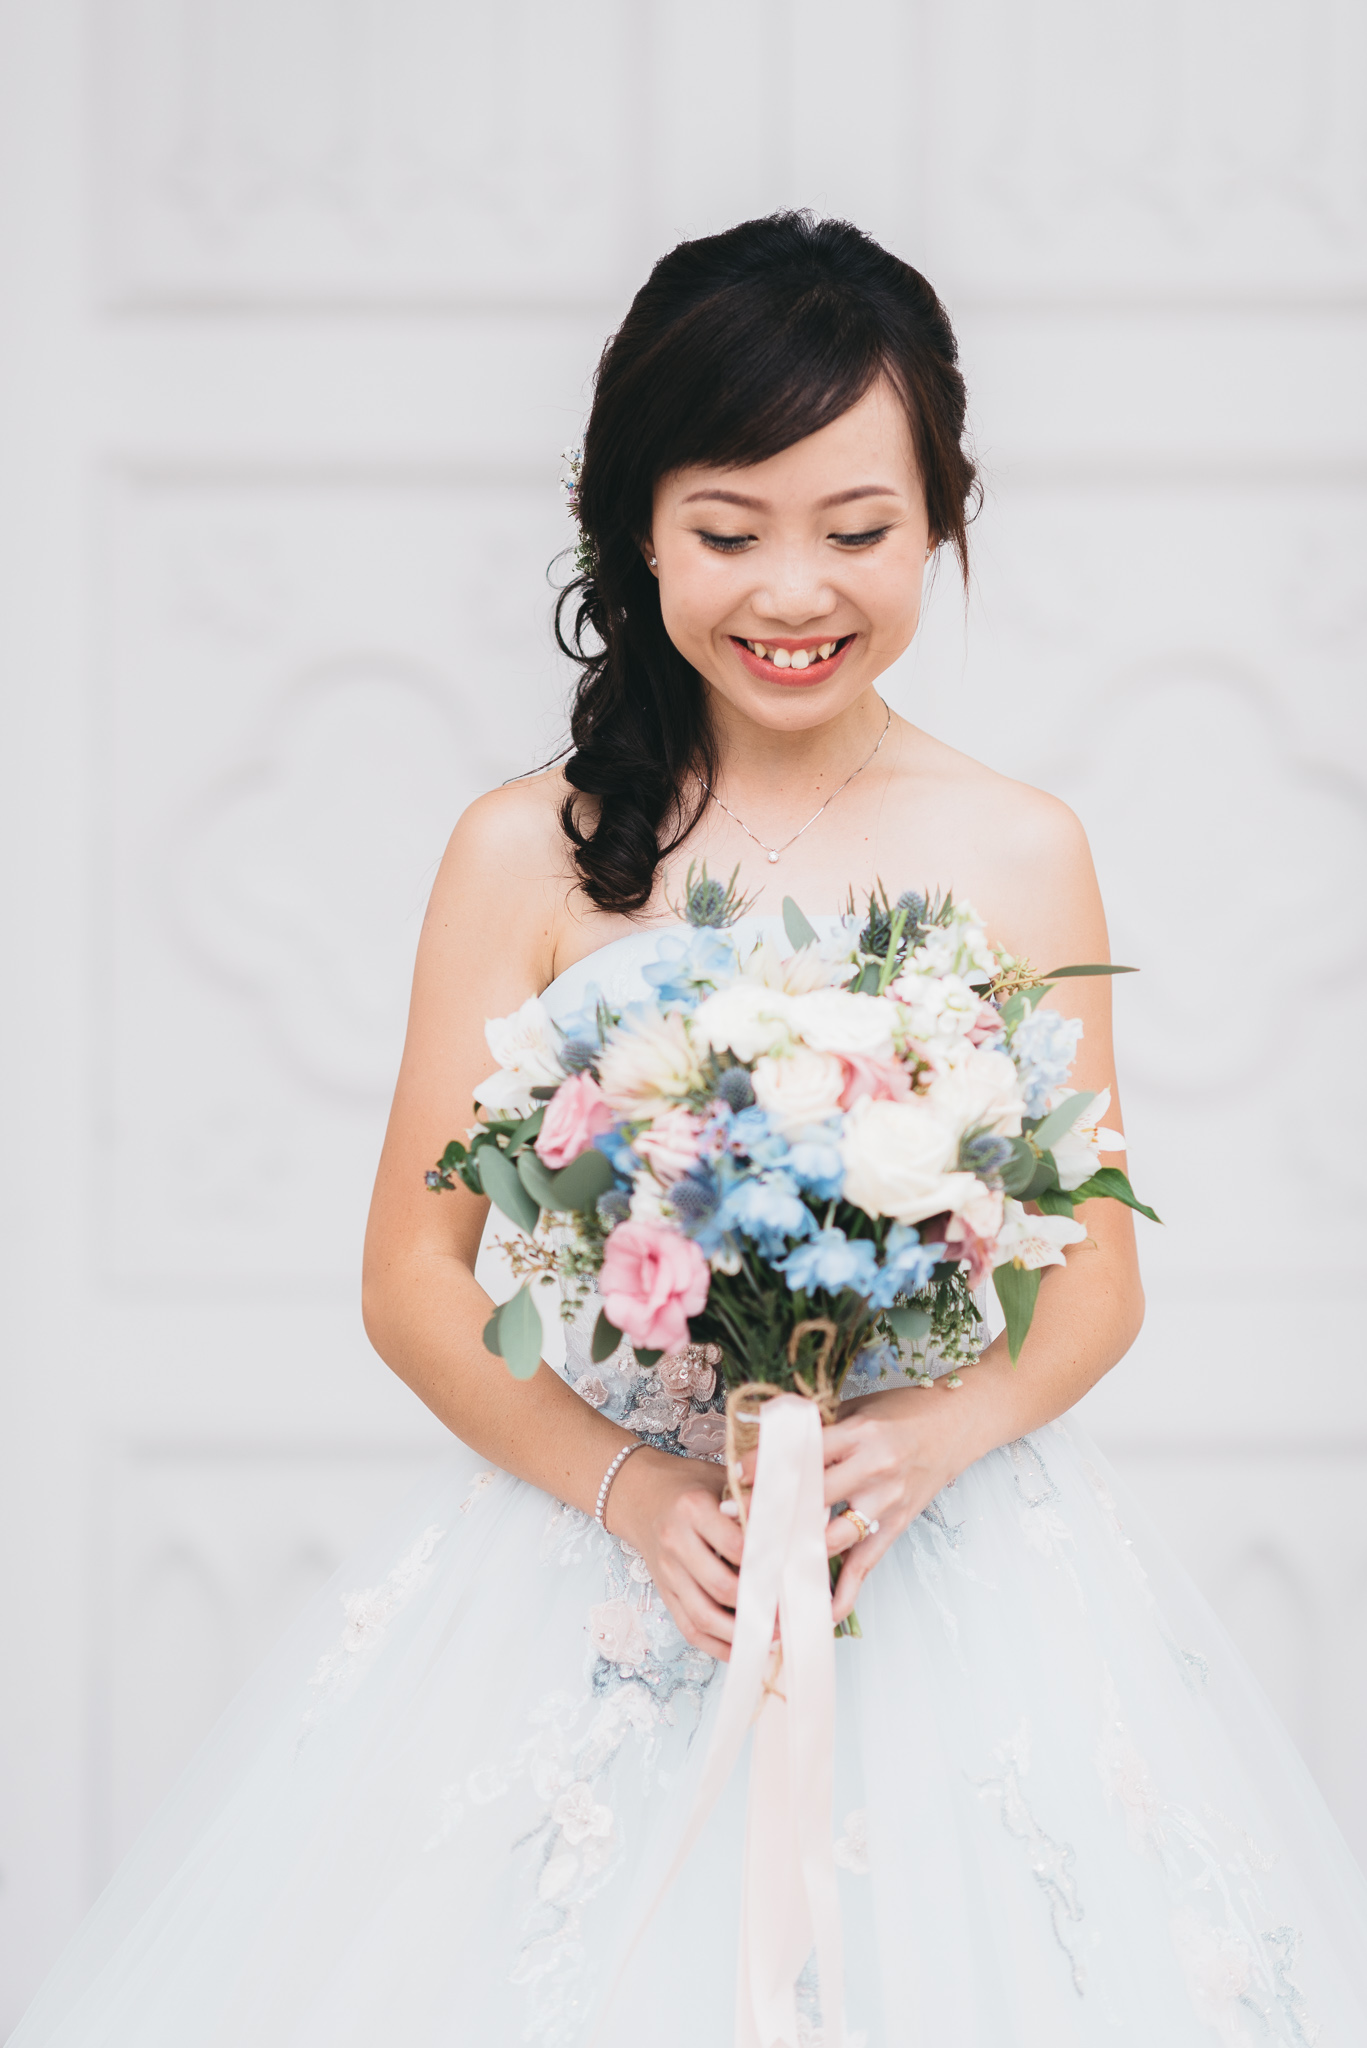 Alice & Wei Bang Wedding Day Highlights (resized for sharing) - 099.jpg